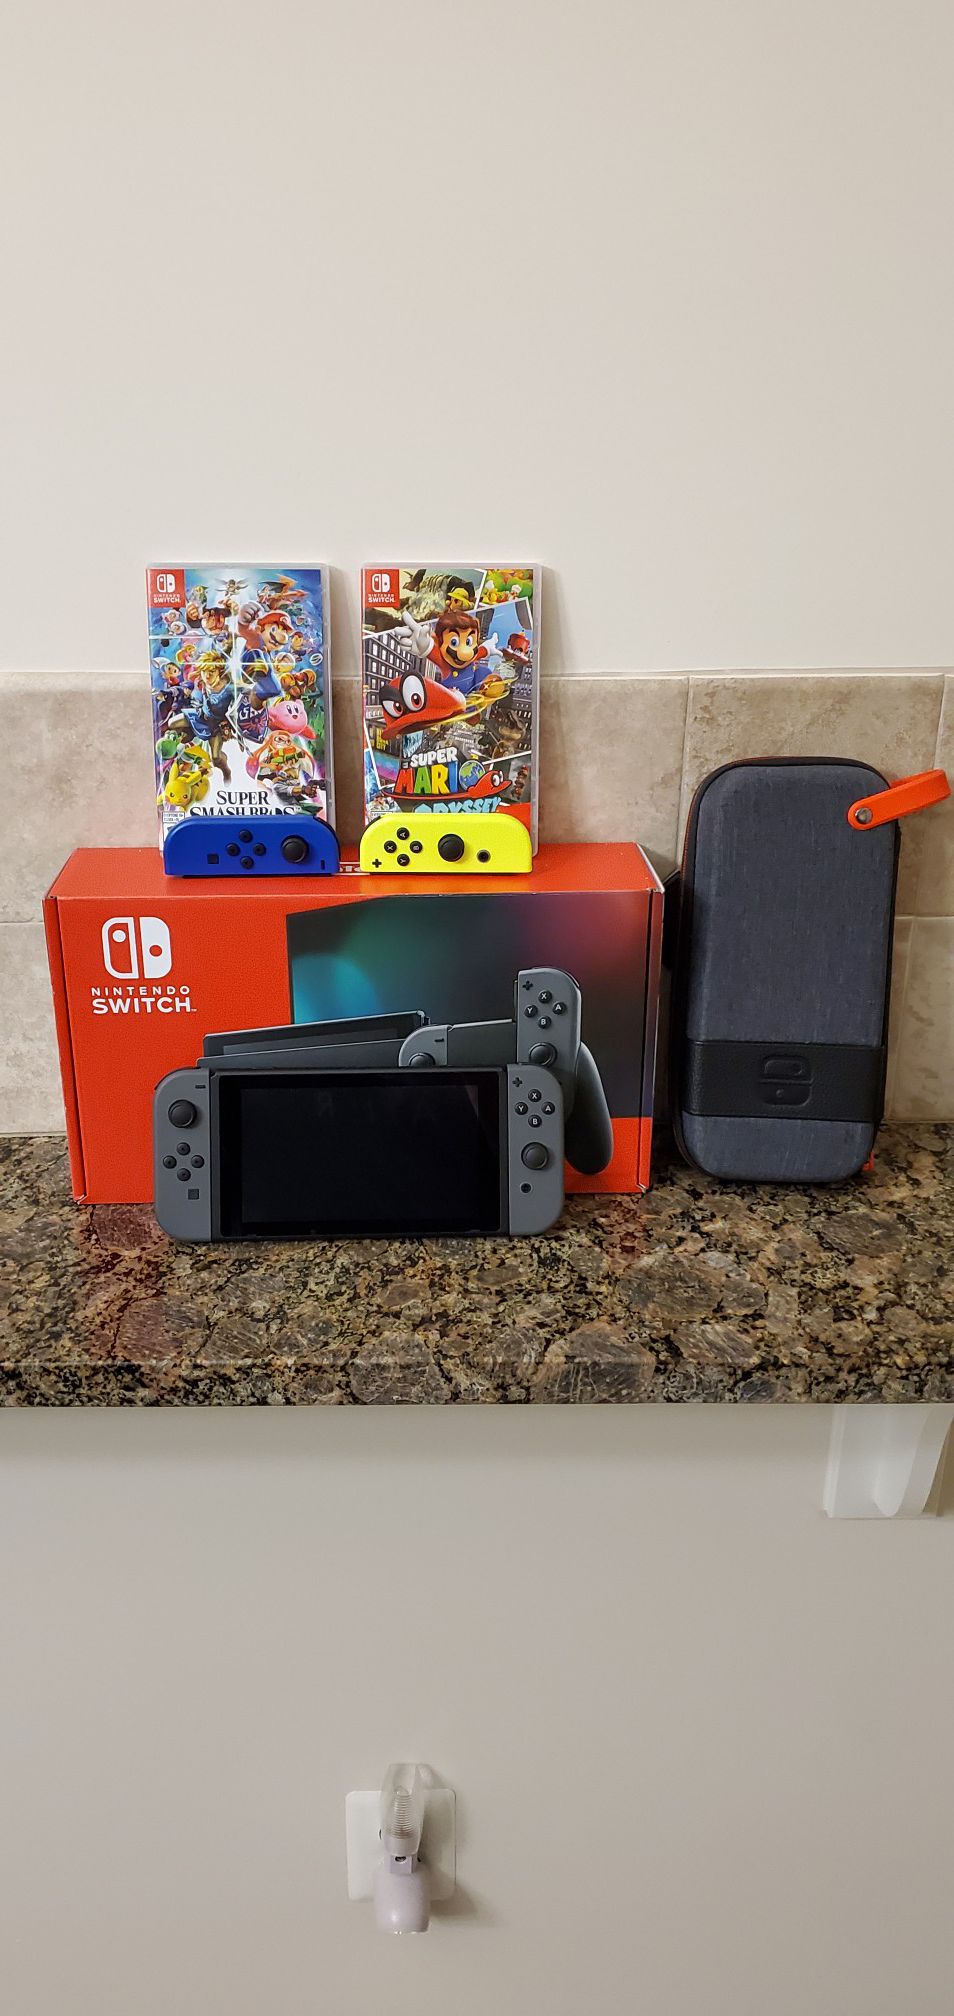 Nintendo switch with 2 games and extra joycons